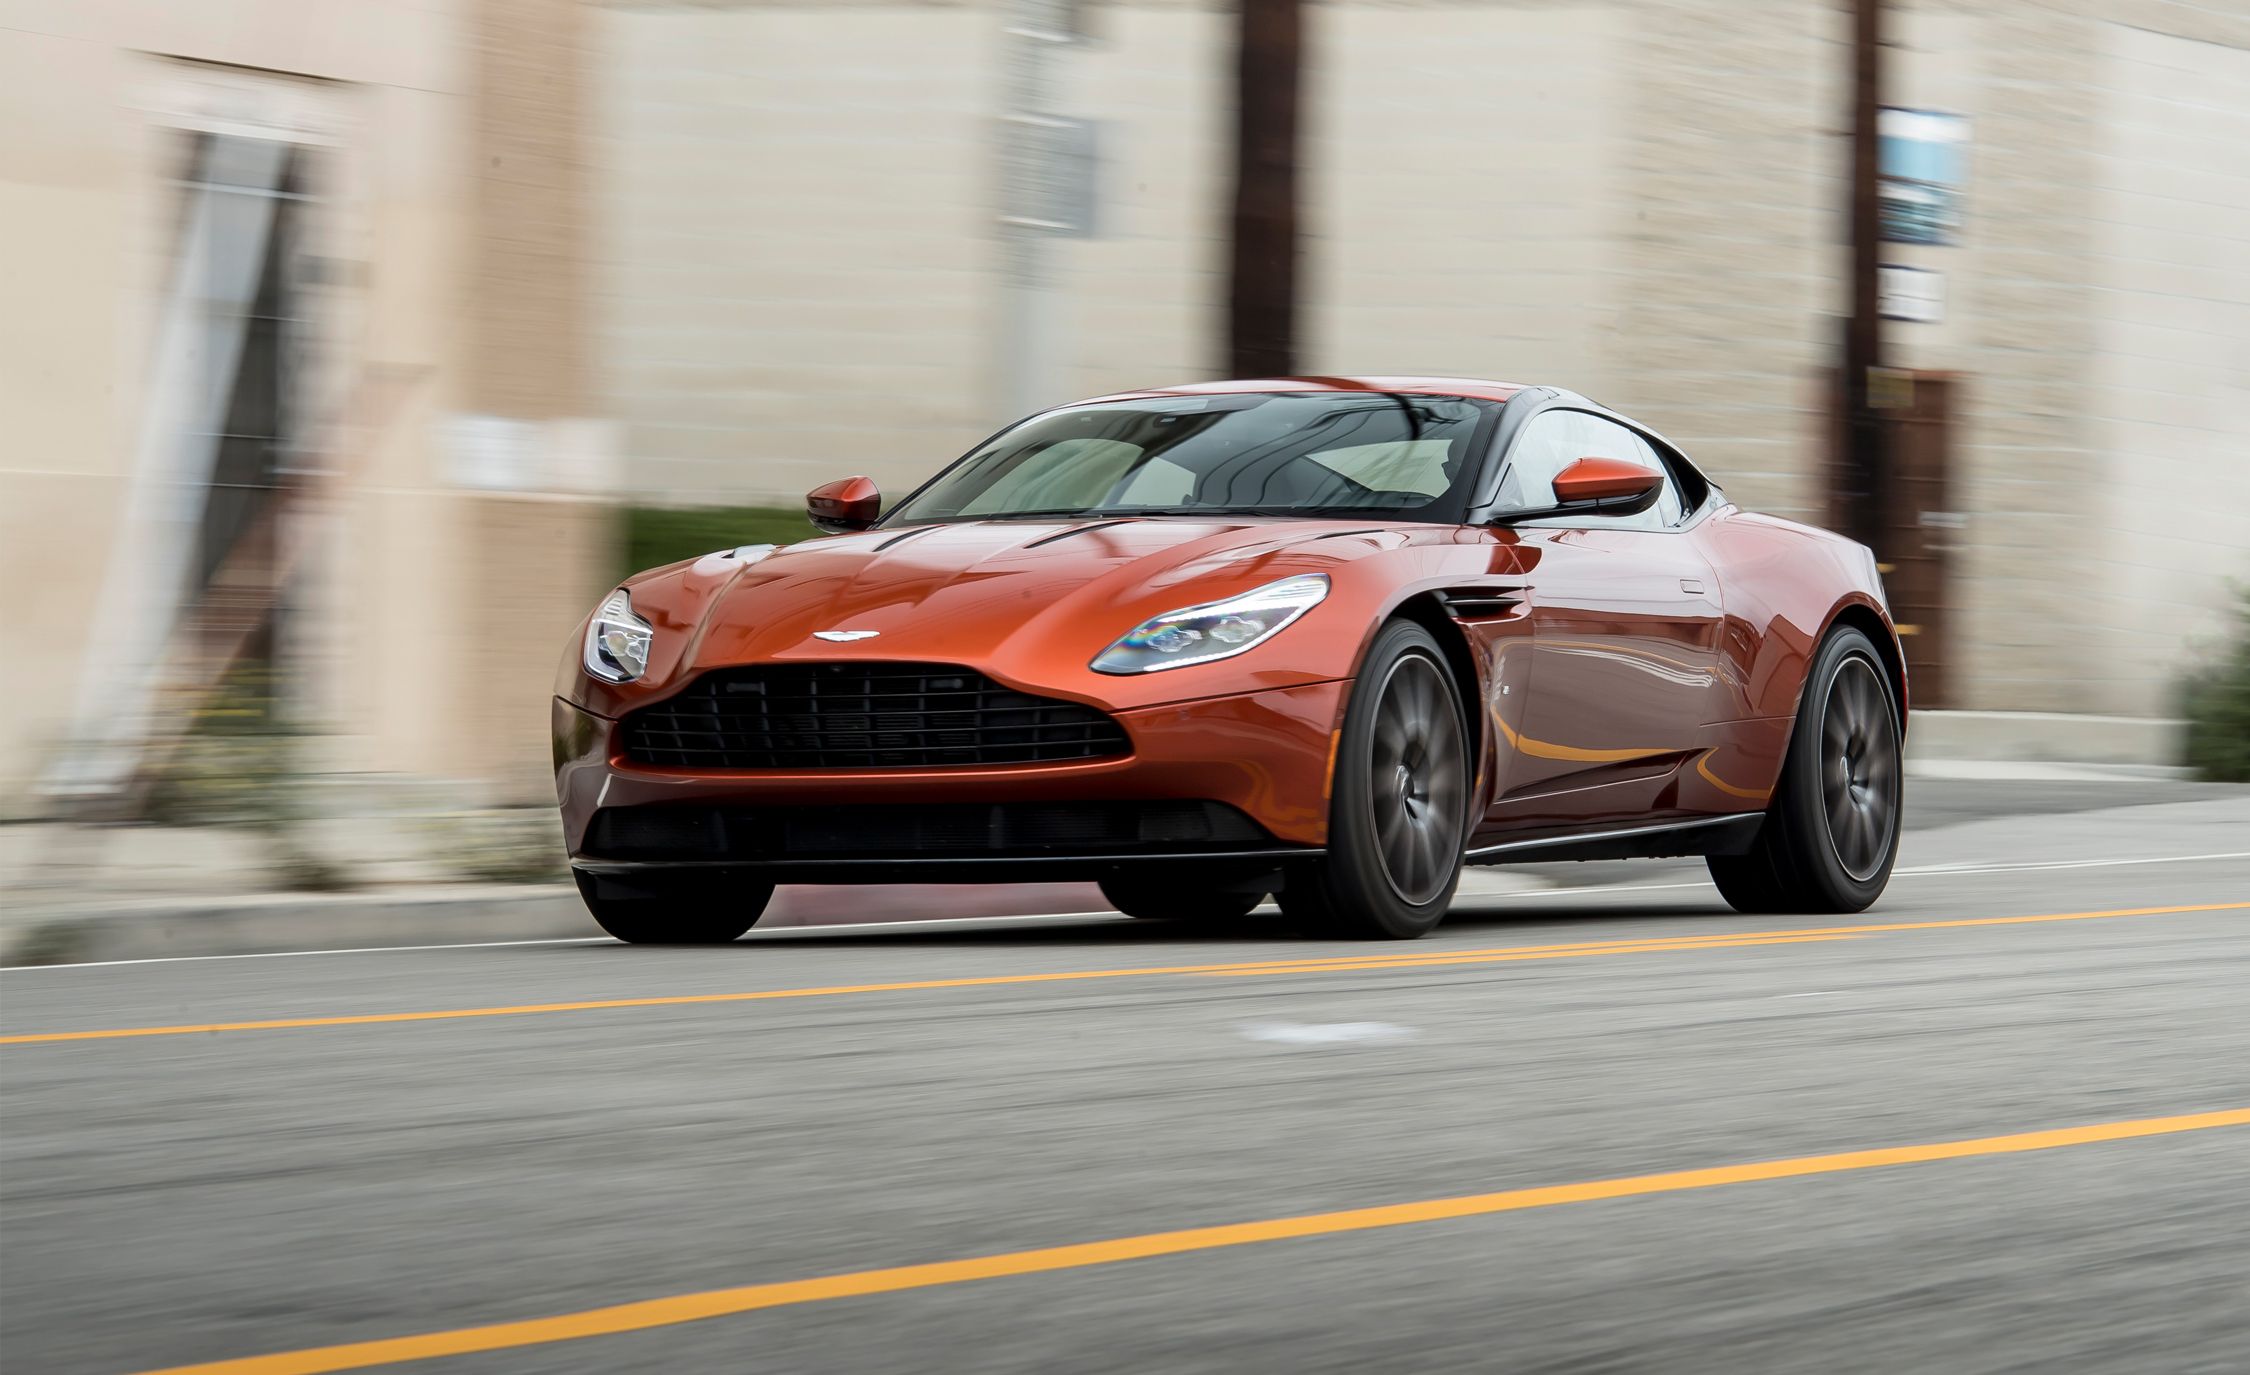 2017 Aston Martin DB11 Tested: The New Classic